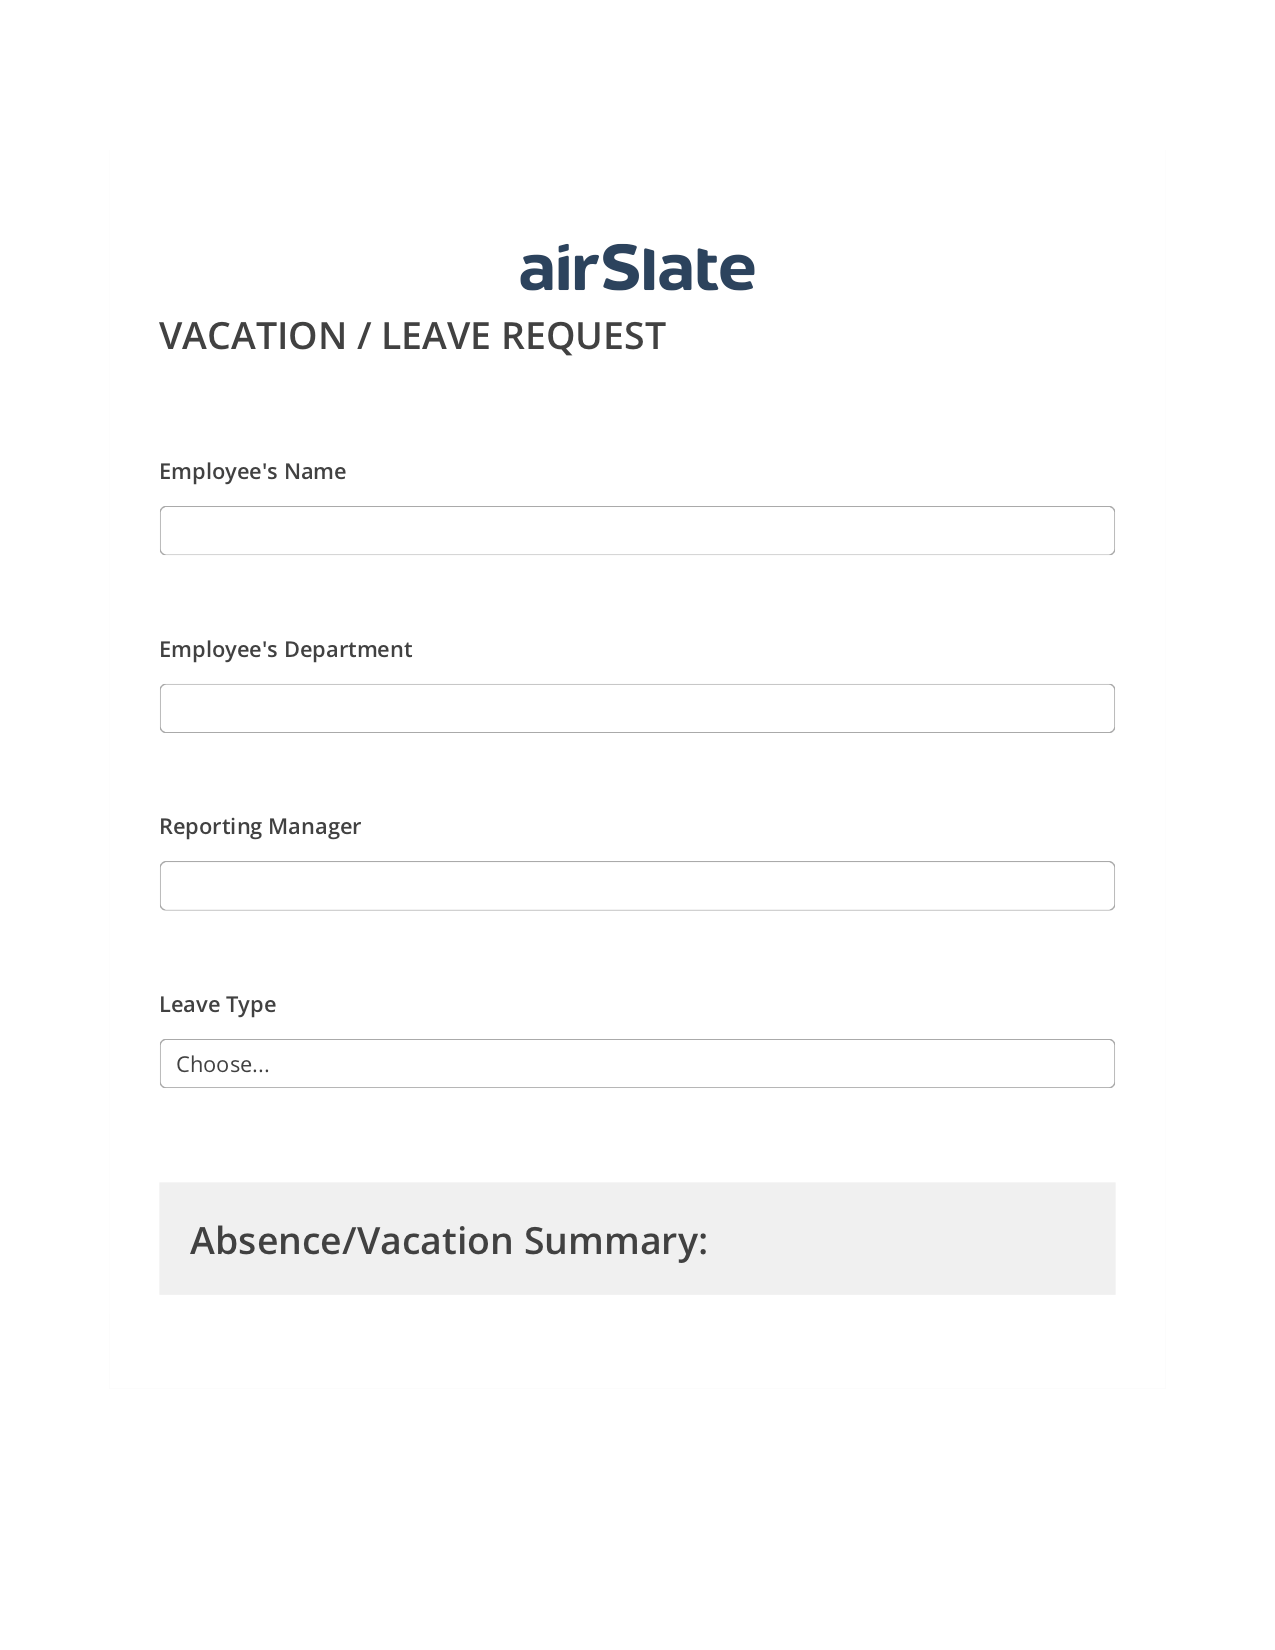 Multirole Vacation/Leave Request Workflow Pre-fill from Salesforce Records Bot, Slack Notification Bot, Archive to SharePoint Folder Bot